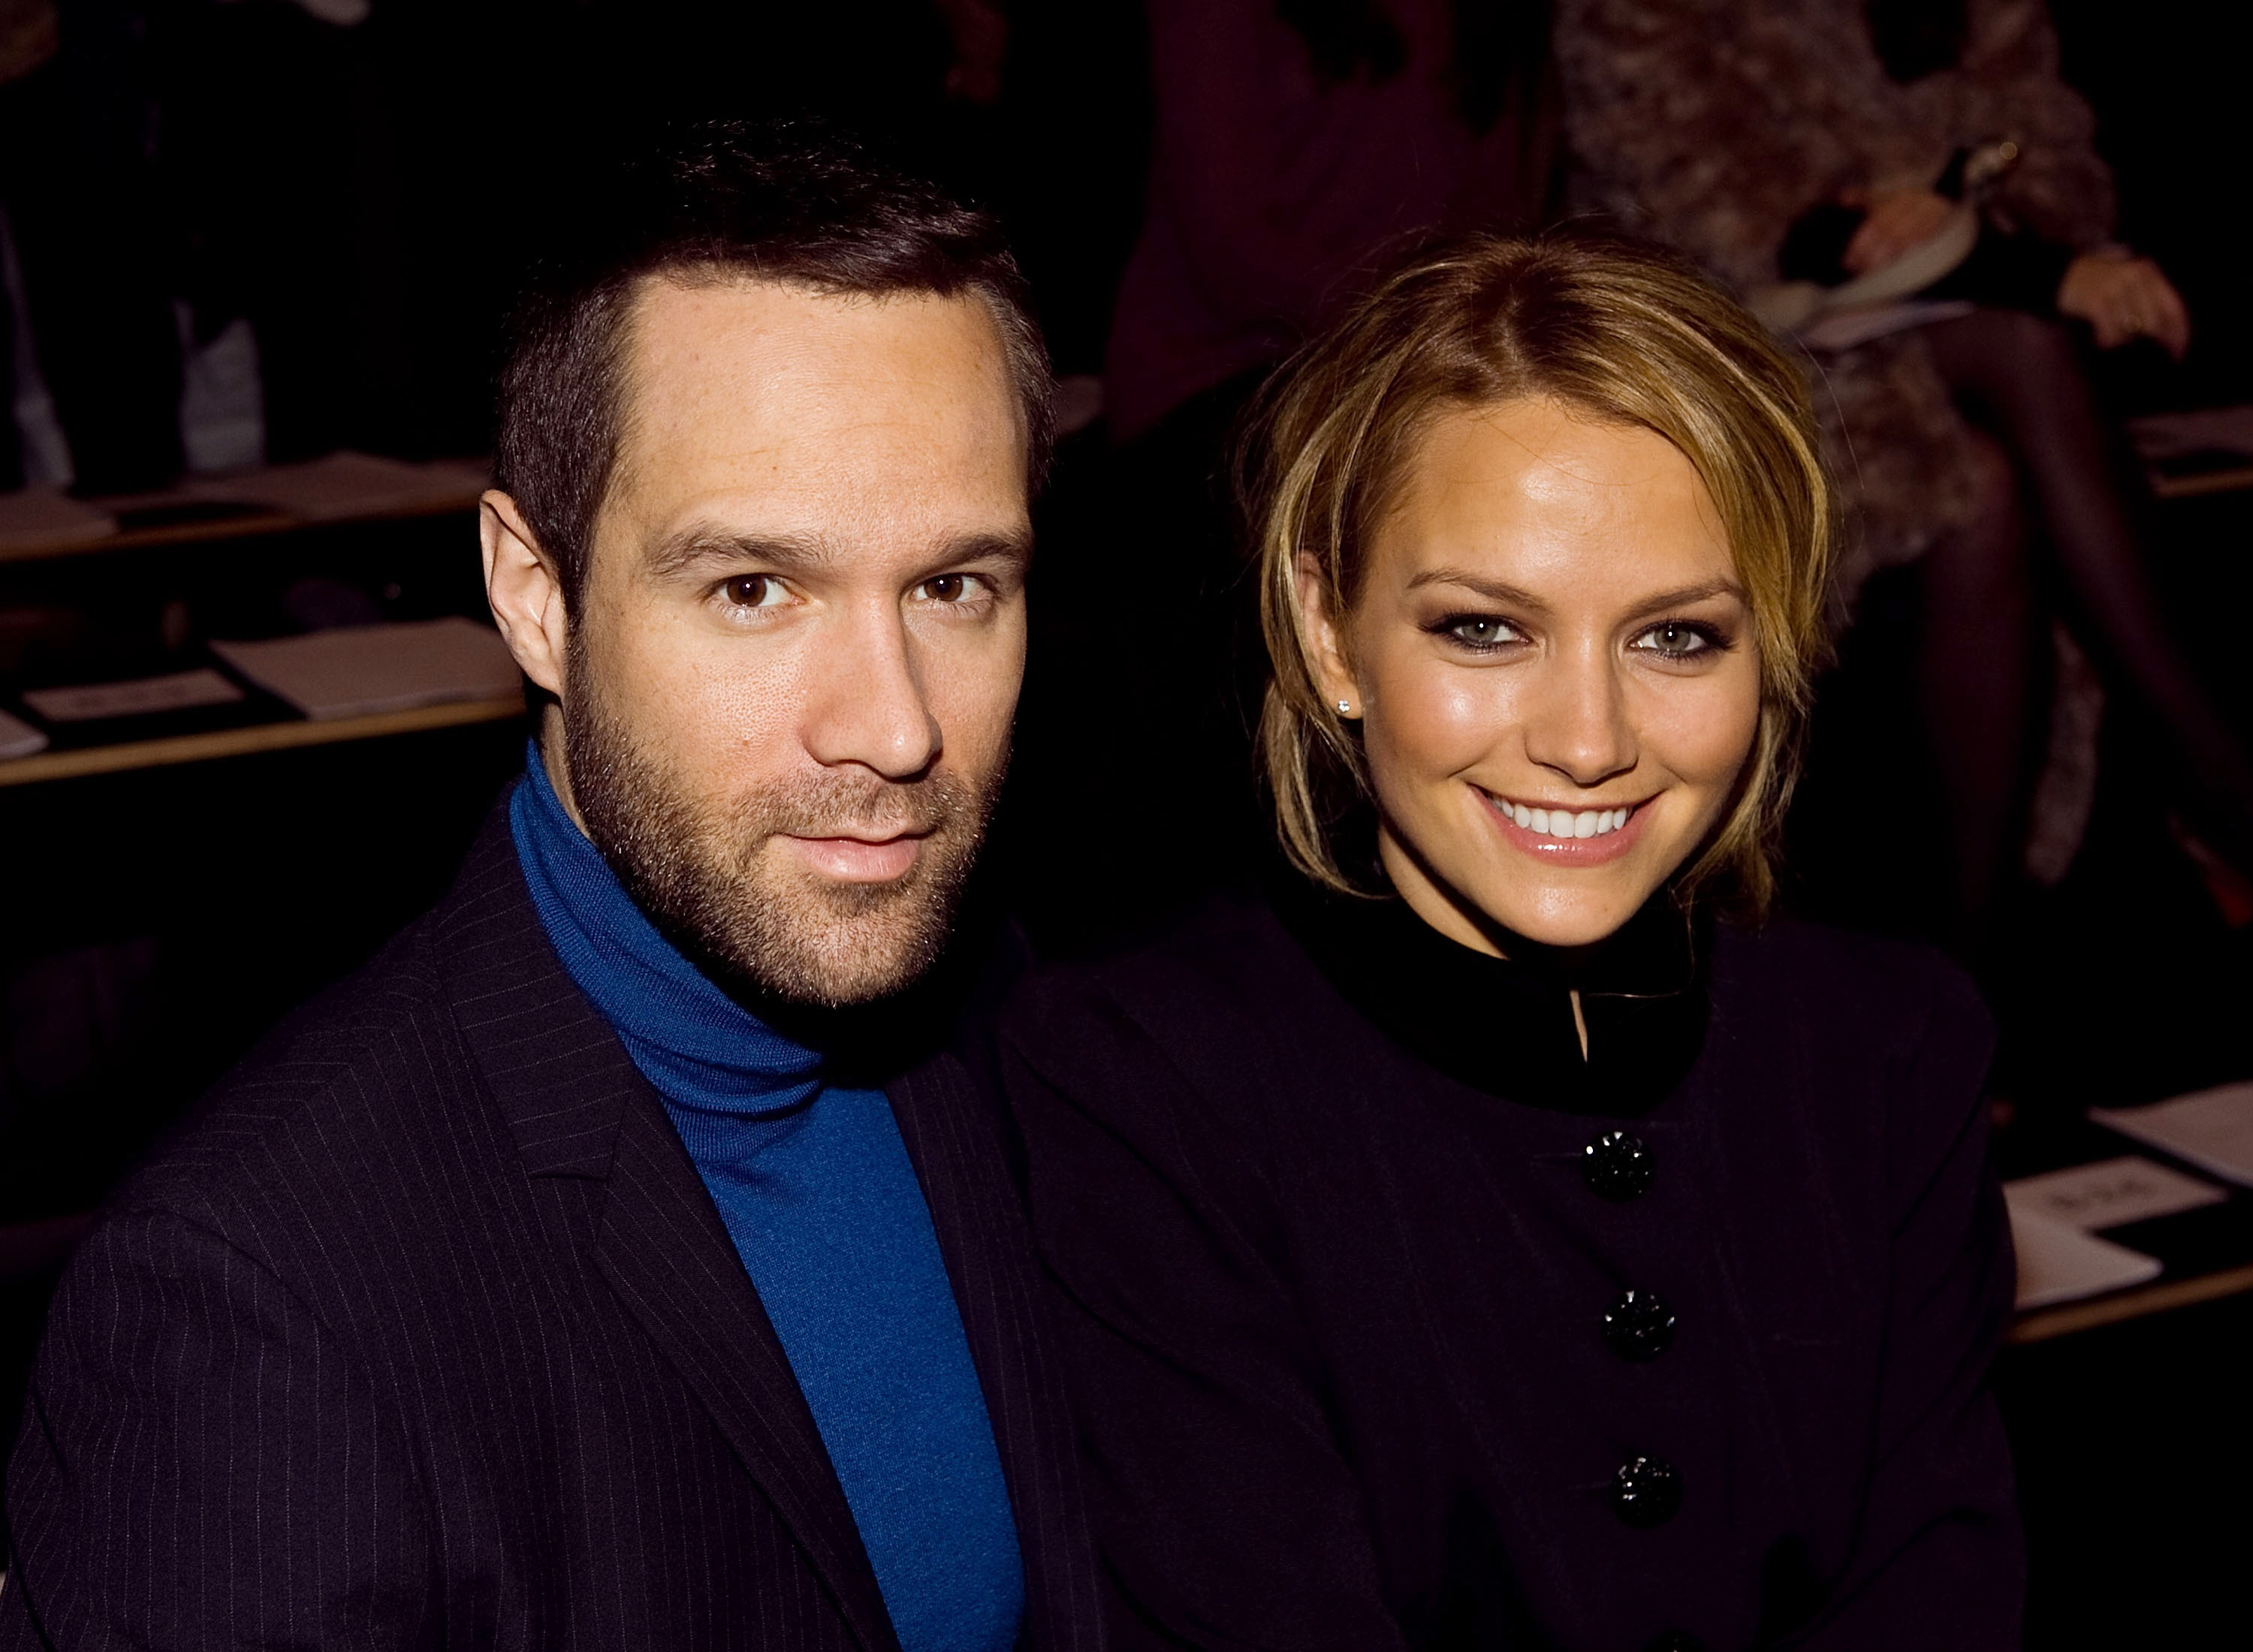 Chris Diamantopoulos and Becky Newton at Cedar Lake, 547 West 26th Street on February 13, 2009, in New York City. | Source: Getty Images